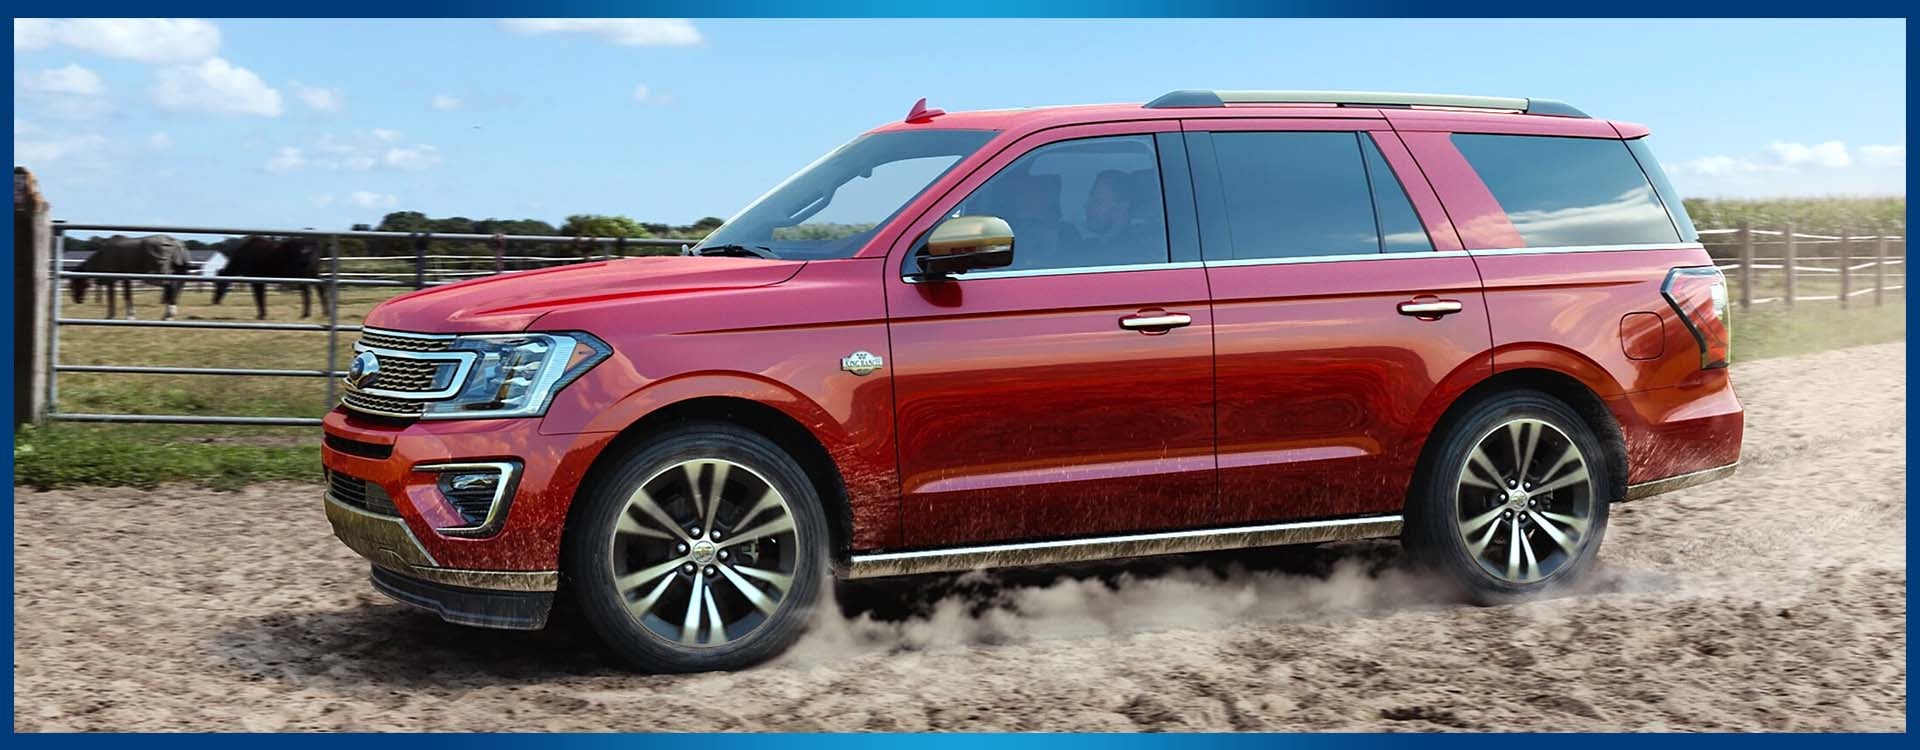 2021 Ford Expedition | Pittsville, MD | View Its Interior & Towing Specs